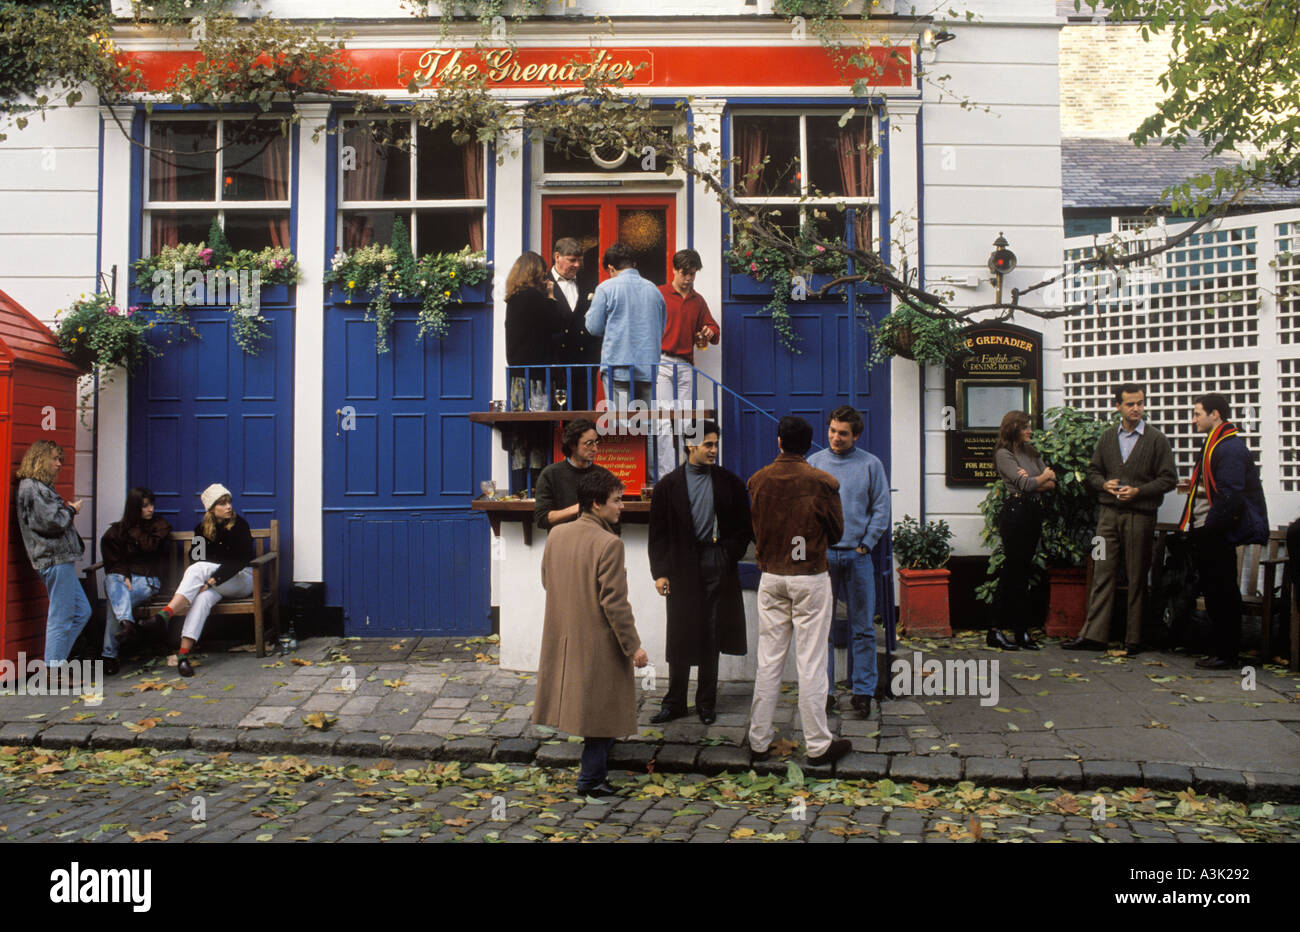 The Grenadier a London pub, group people outside of the front of building. Near Hyde Park, Wilton Row, Wilton Mews, Belgravia, London England. 1990s Stock Photo